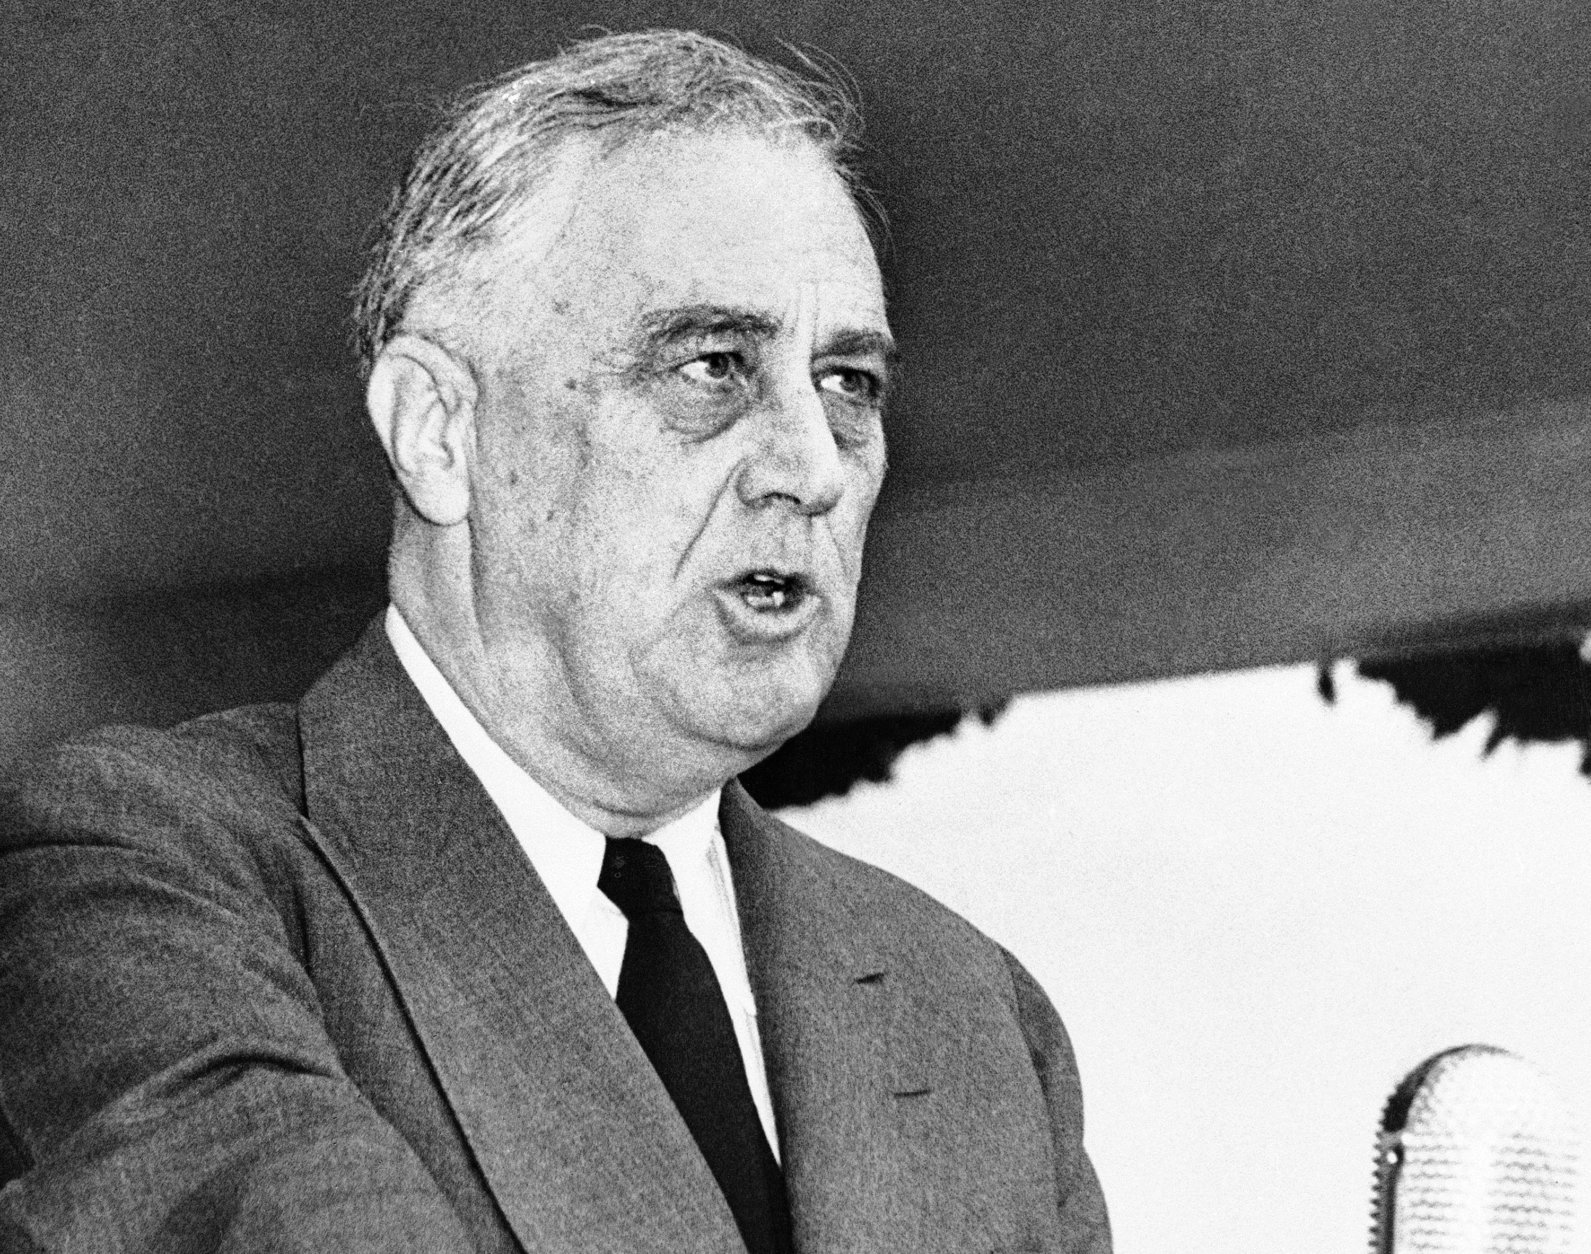 FILE - In this April 13, 1943 black-and-white file photo, President Franklin Delano Roosevelt speaks in Washington. When President Barack Obama's re-election campaign unveiled a new slogan, some conservative critics were quick to pounce. "Forward", they asserted, is a word long associated with Europe's radical left, reaffirming their contention that Obama is, to some degree a socialist. Using "socialist" as a political epithet in the U.S. dates back to pre-Civil War days when abolitionist newspaper editor Horace Greeley was branded a socialist by some pro-slavery adversaries. Decades later, many elements of Franklin Roosevelt's New Deal _ including Social Security _ were denounced as socialist. (AP Photo/Robert Clover, File)